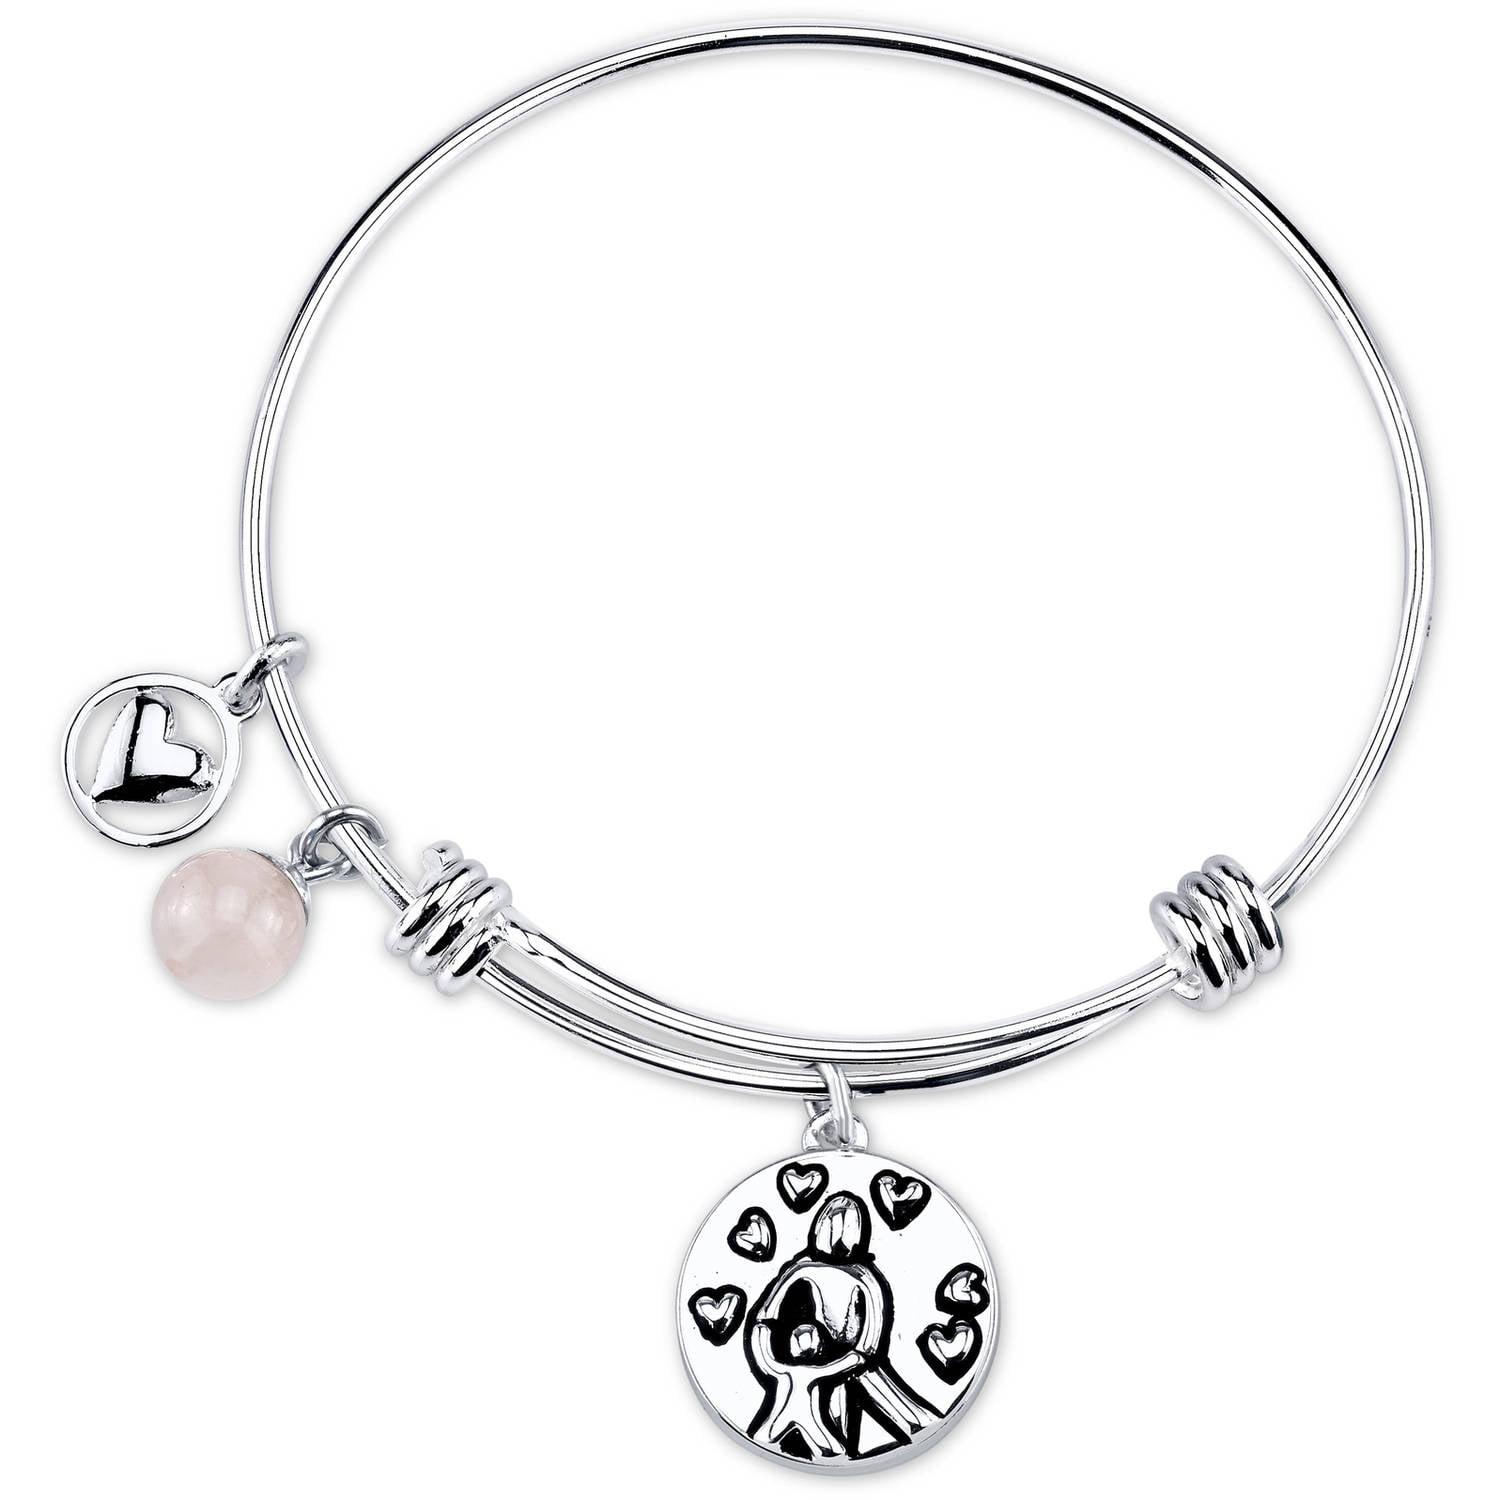 NEW Silver Love Heart Mothers Day Mum & Baby Child Charm Bracelet Jewellery Bead 